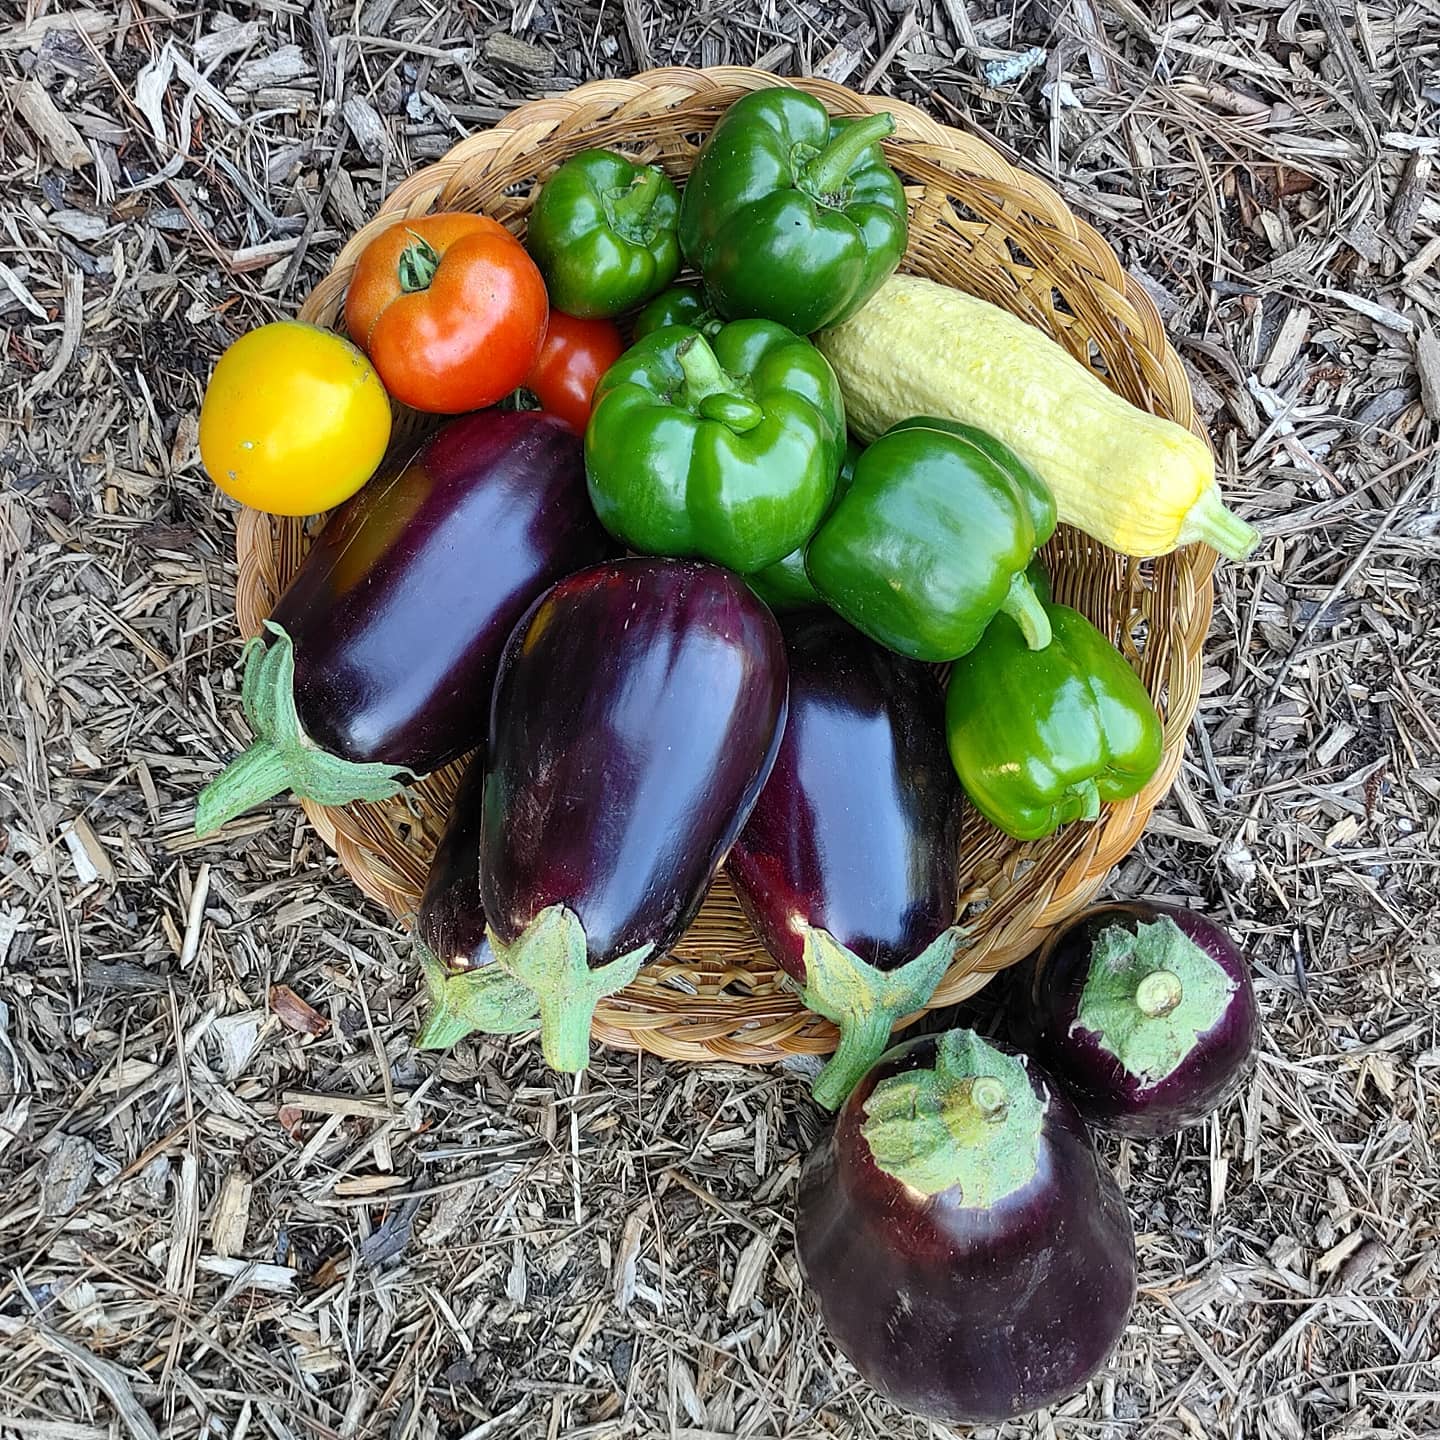 Harvest! I'm going to need some new eggplant recipes.